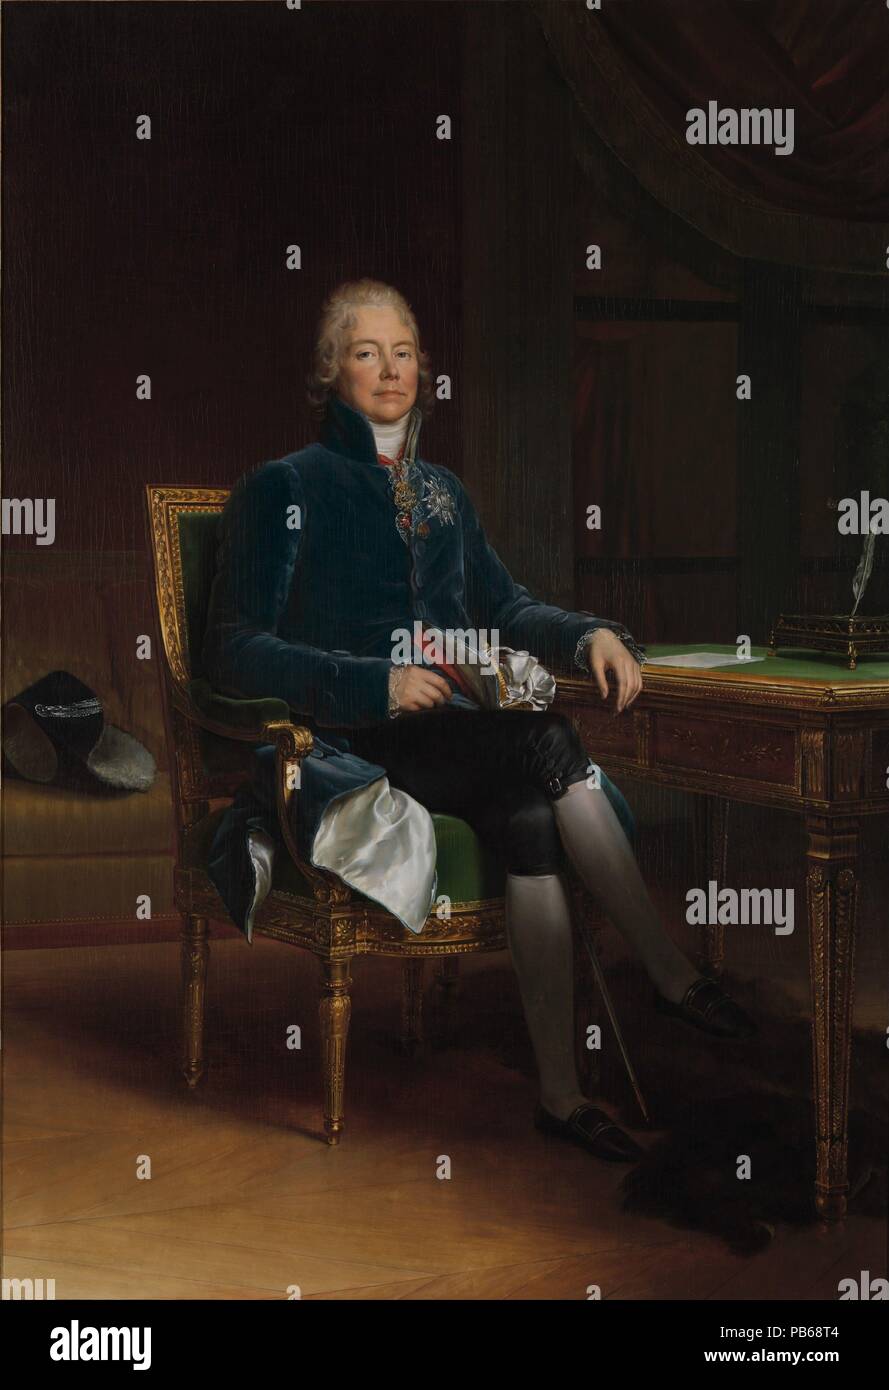 Charles Maurice de Talleyrand Périgord (1754-1838), Prince de Bénévent. Artist: baron François Gérard (French, Rome 1770-1837 Paris). Dimensions: 83 7/8 x 57 7/8 in. (213 x 147 cm). Date: 1808.  Talleyrand commissioned this elegant informal image after he resigned from his position as minister of foreign affairs to protest Napoleon's continuing military ambitions. Gérard knew and received him personally in his studio: the imposing presence and unrevealing expression are typical. The insignia of the <i>Legion d'honneur</i> is embroidered on Talleyrand's coat and across his waistcoat is the red  Stock Photo